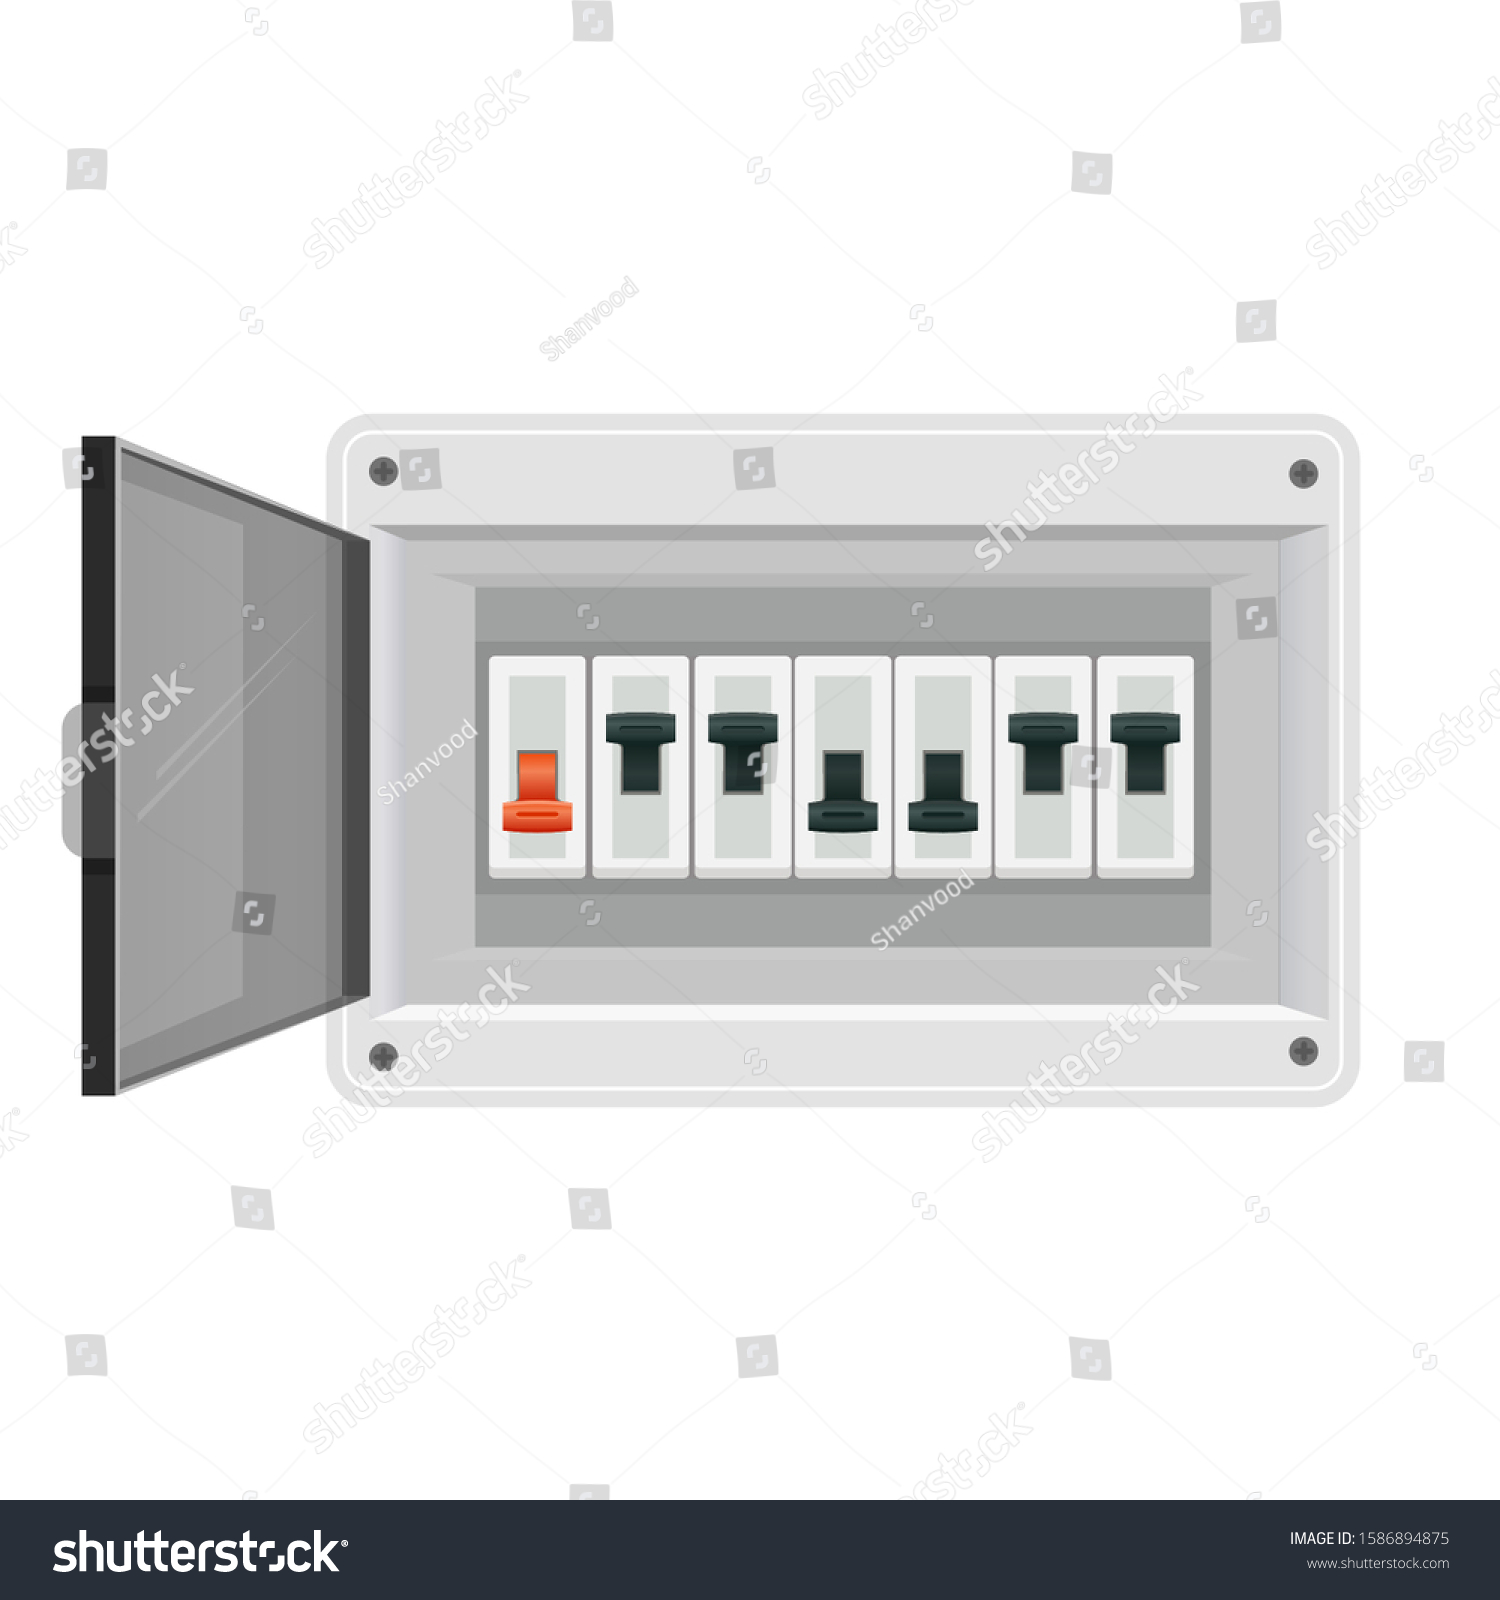 SVG of Fuse board box. Electrical power switch panel. Electricity equipment. Vector svg